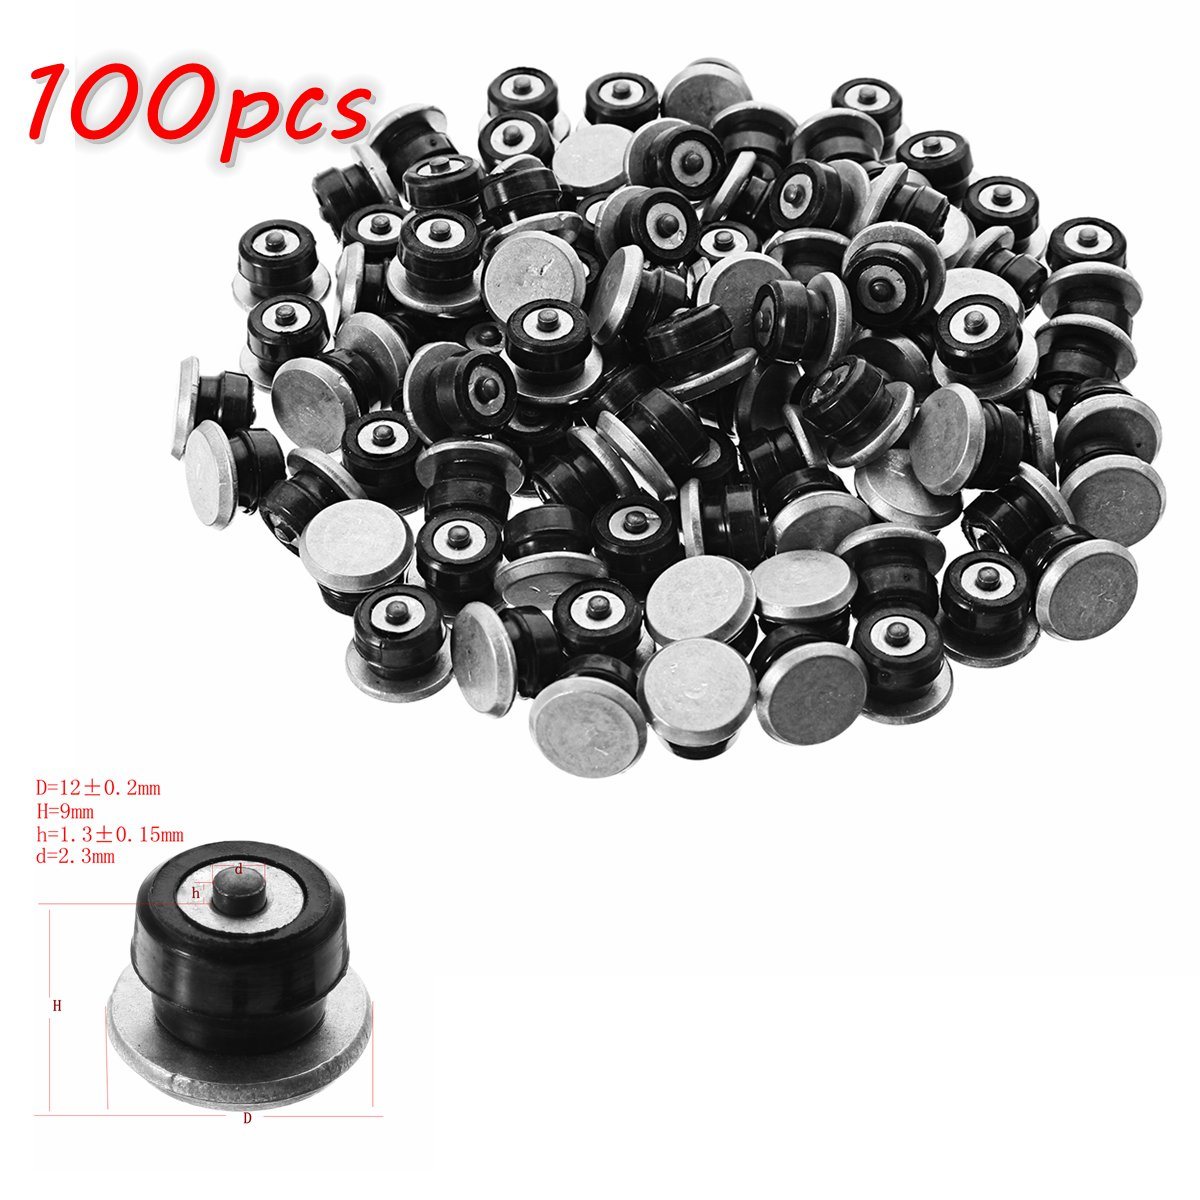 100pcs Winter Tire Spikes Car Tires Studs Screw Snow Spikes Wheel Tyre Snow Chains Studs For Auto Car Motorcycle SUV ATV Truck